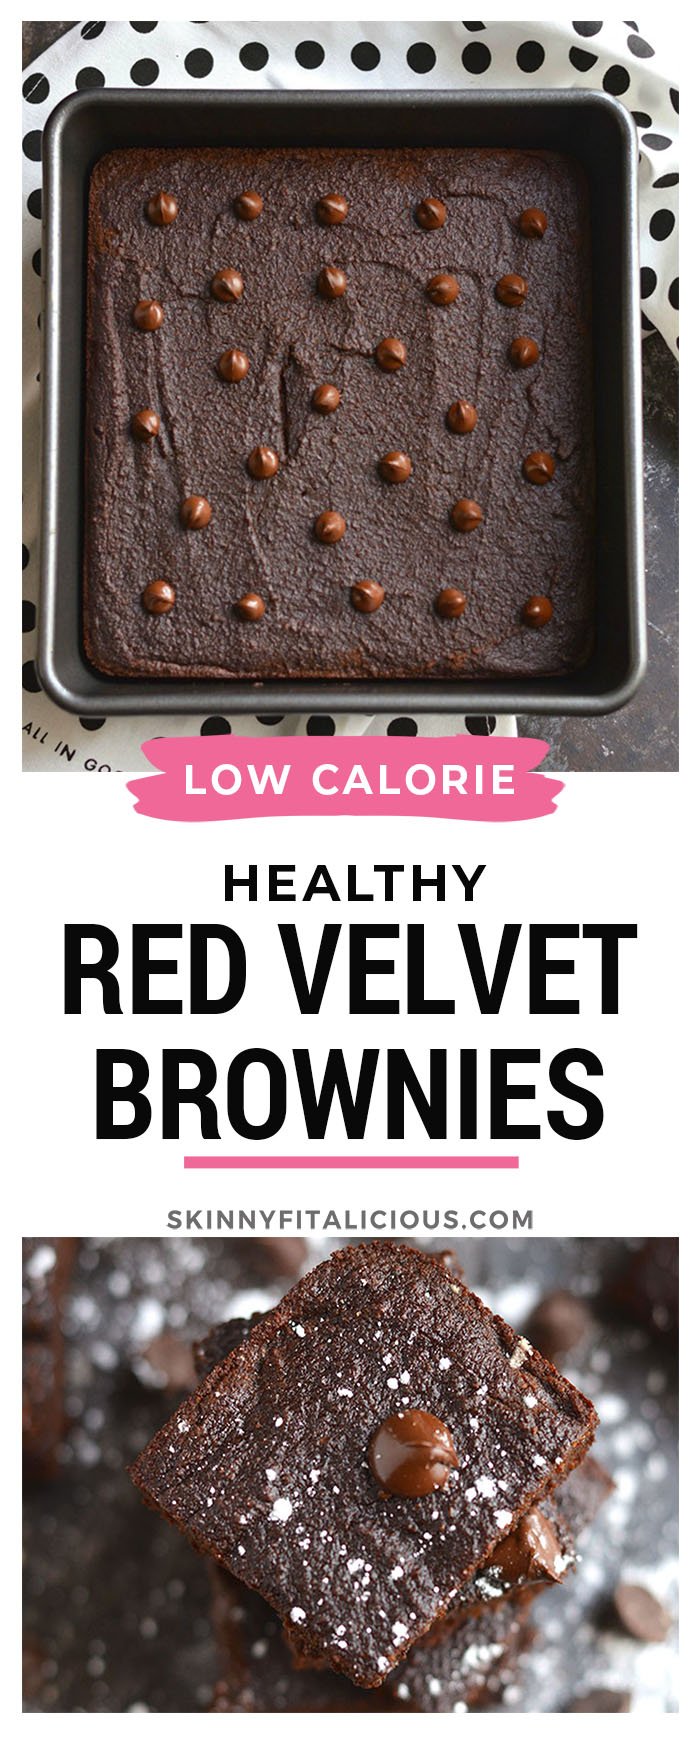 Luscious Red Velvet Beet Brownies! Made secretly healthy with beets, these brownies are rich, dark and chocolatey. Exactly the way brownies are meant, only healthier and a weight loss friendly recipe!